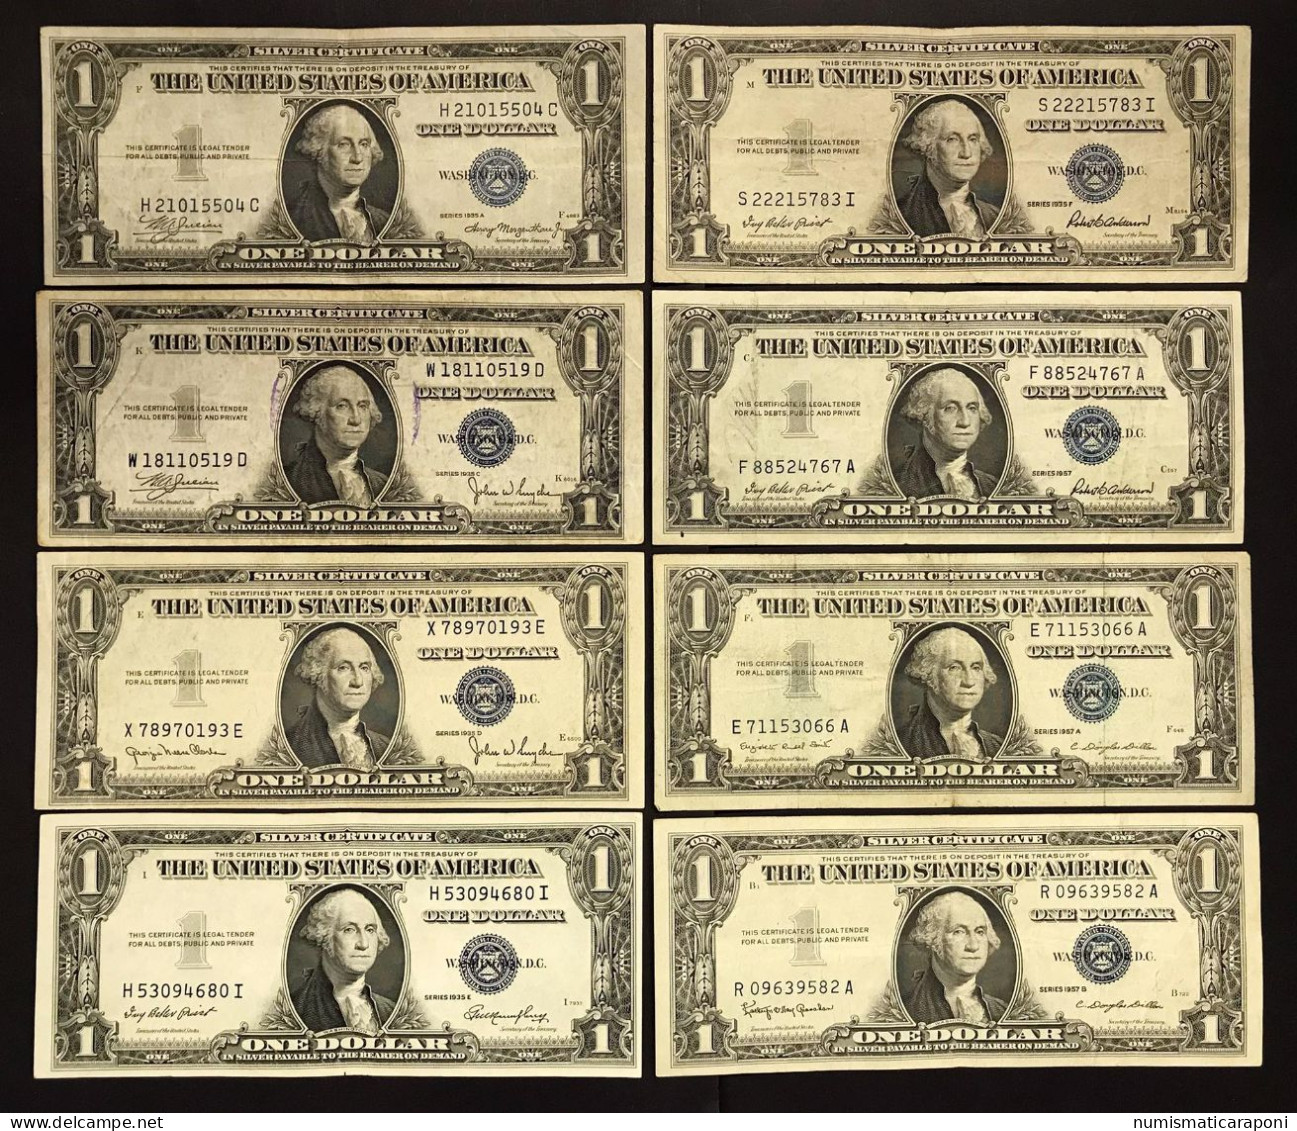 Usa U.s.a. Stati Uniti 1935 A C D E + 1957 + A B F $1 DOLLAR BILL UNITED STATES LEGAL TENDER NOTE Blue Seal  LOTTO.620 - Silver Certificates - Títulos Plata (1878-1923)